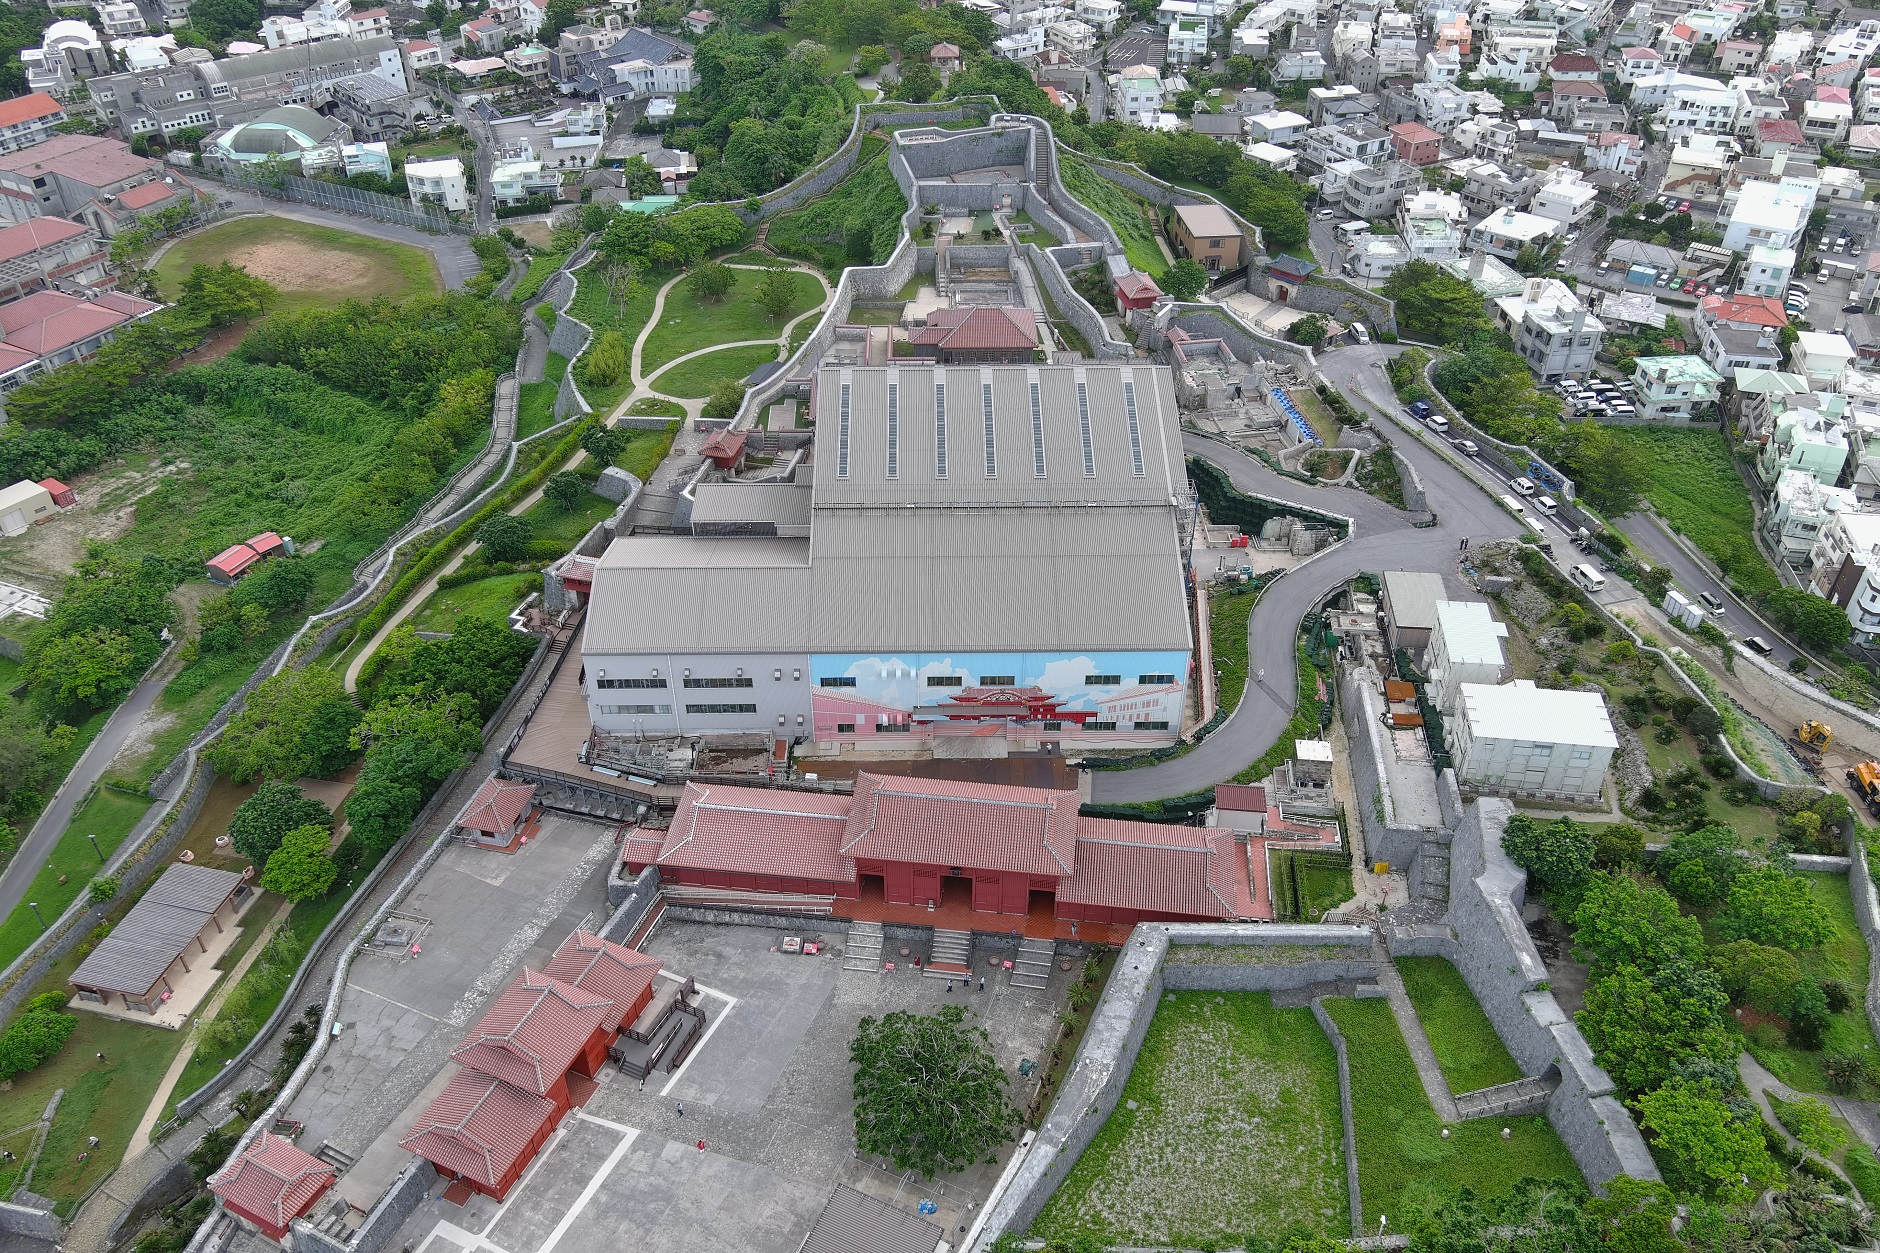 Panoramic view of Shurijo Castle. The temporary building of the Main Hall is pictured at the center.